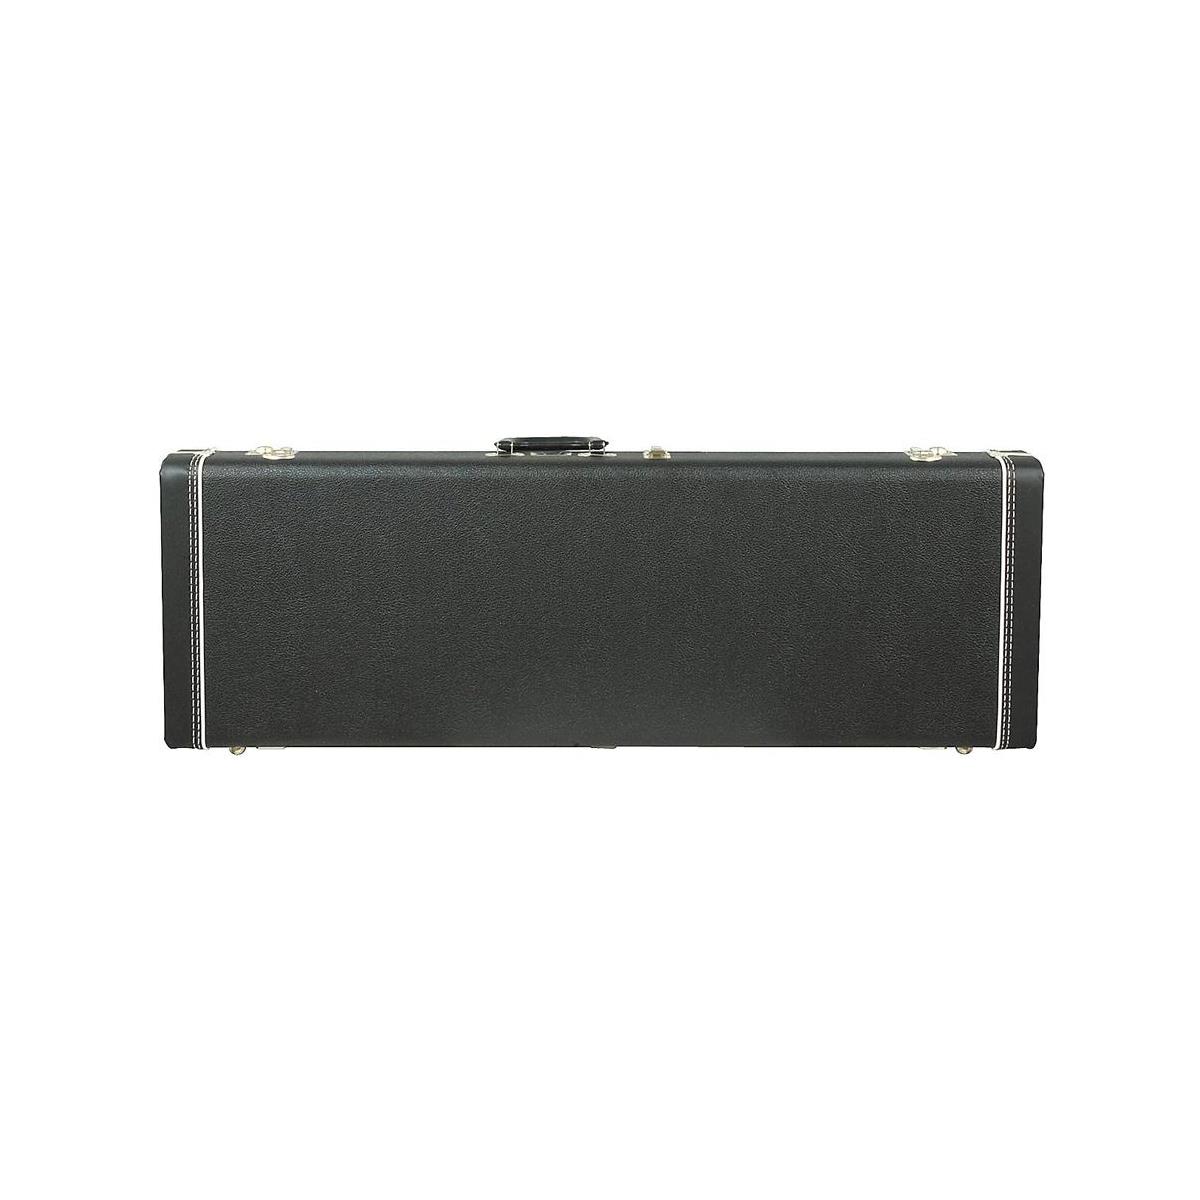 Image of Fender Precision Bass Black Multi Fit Hardshell Case with Black Acrylic Interior